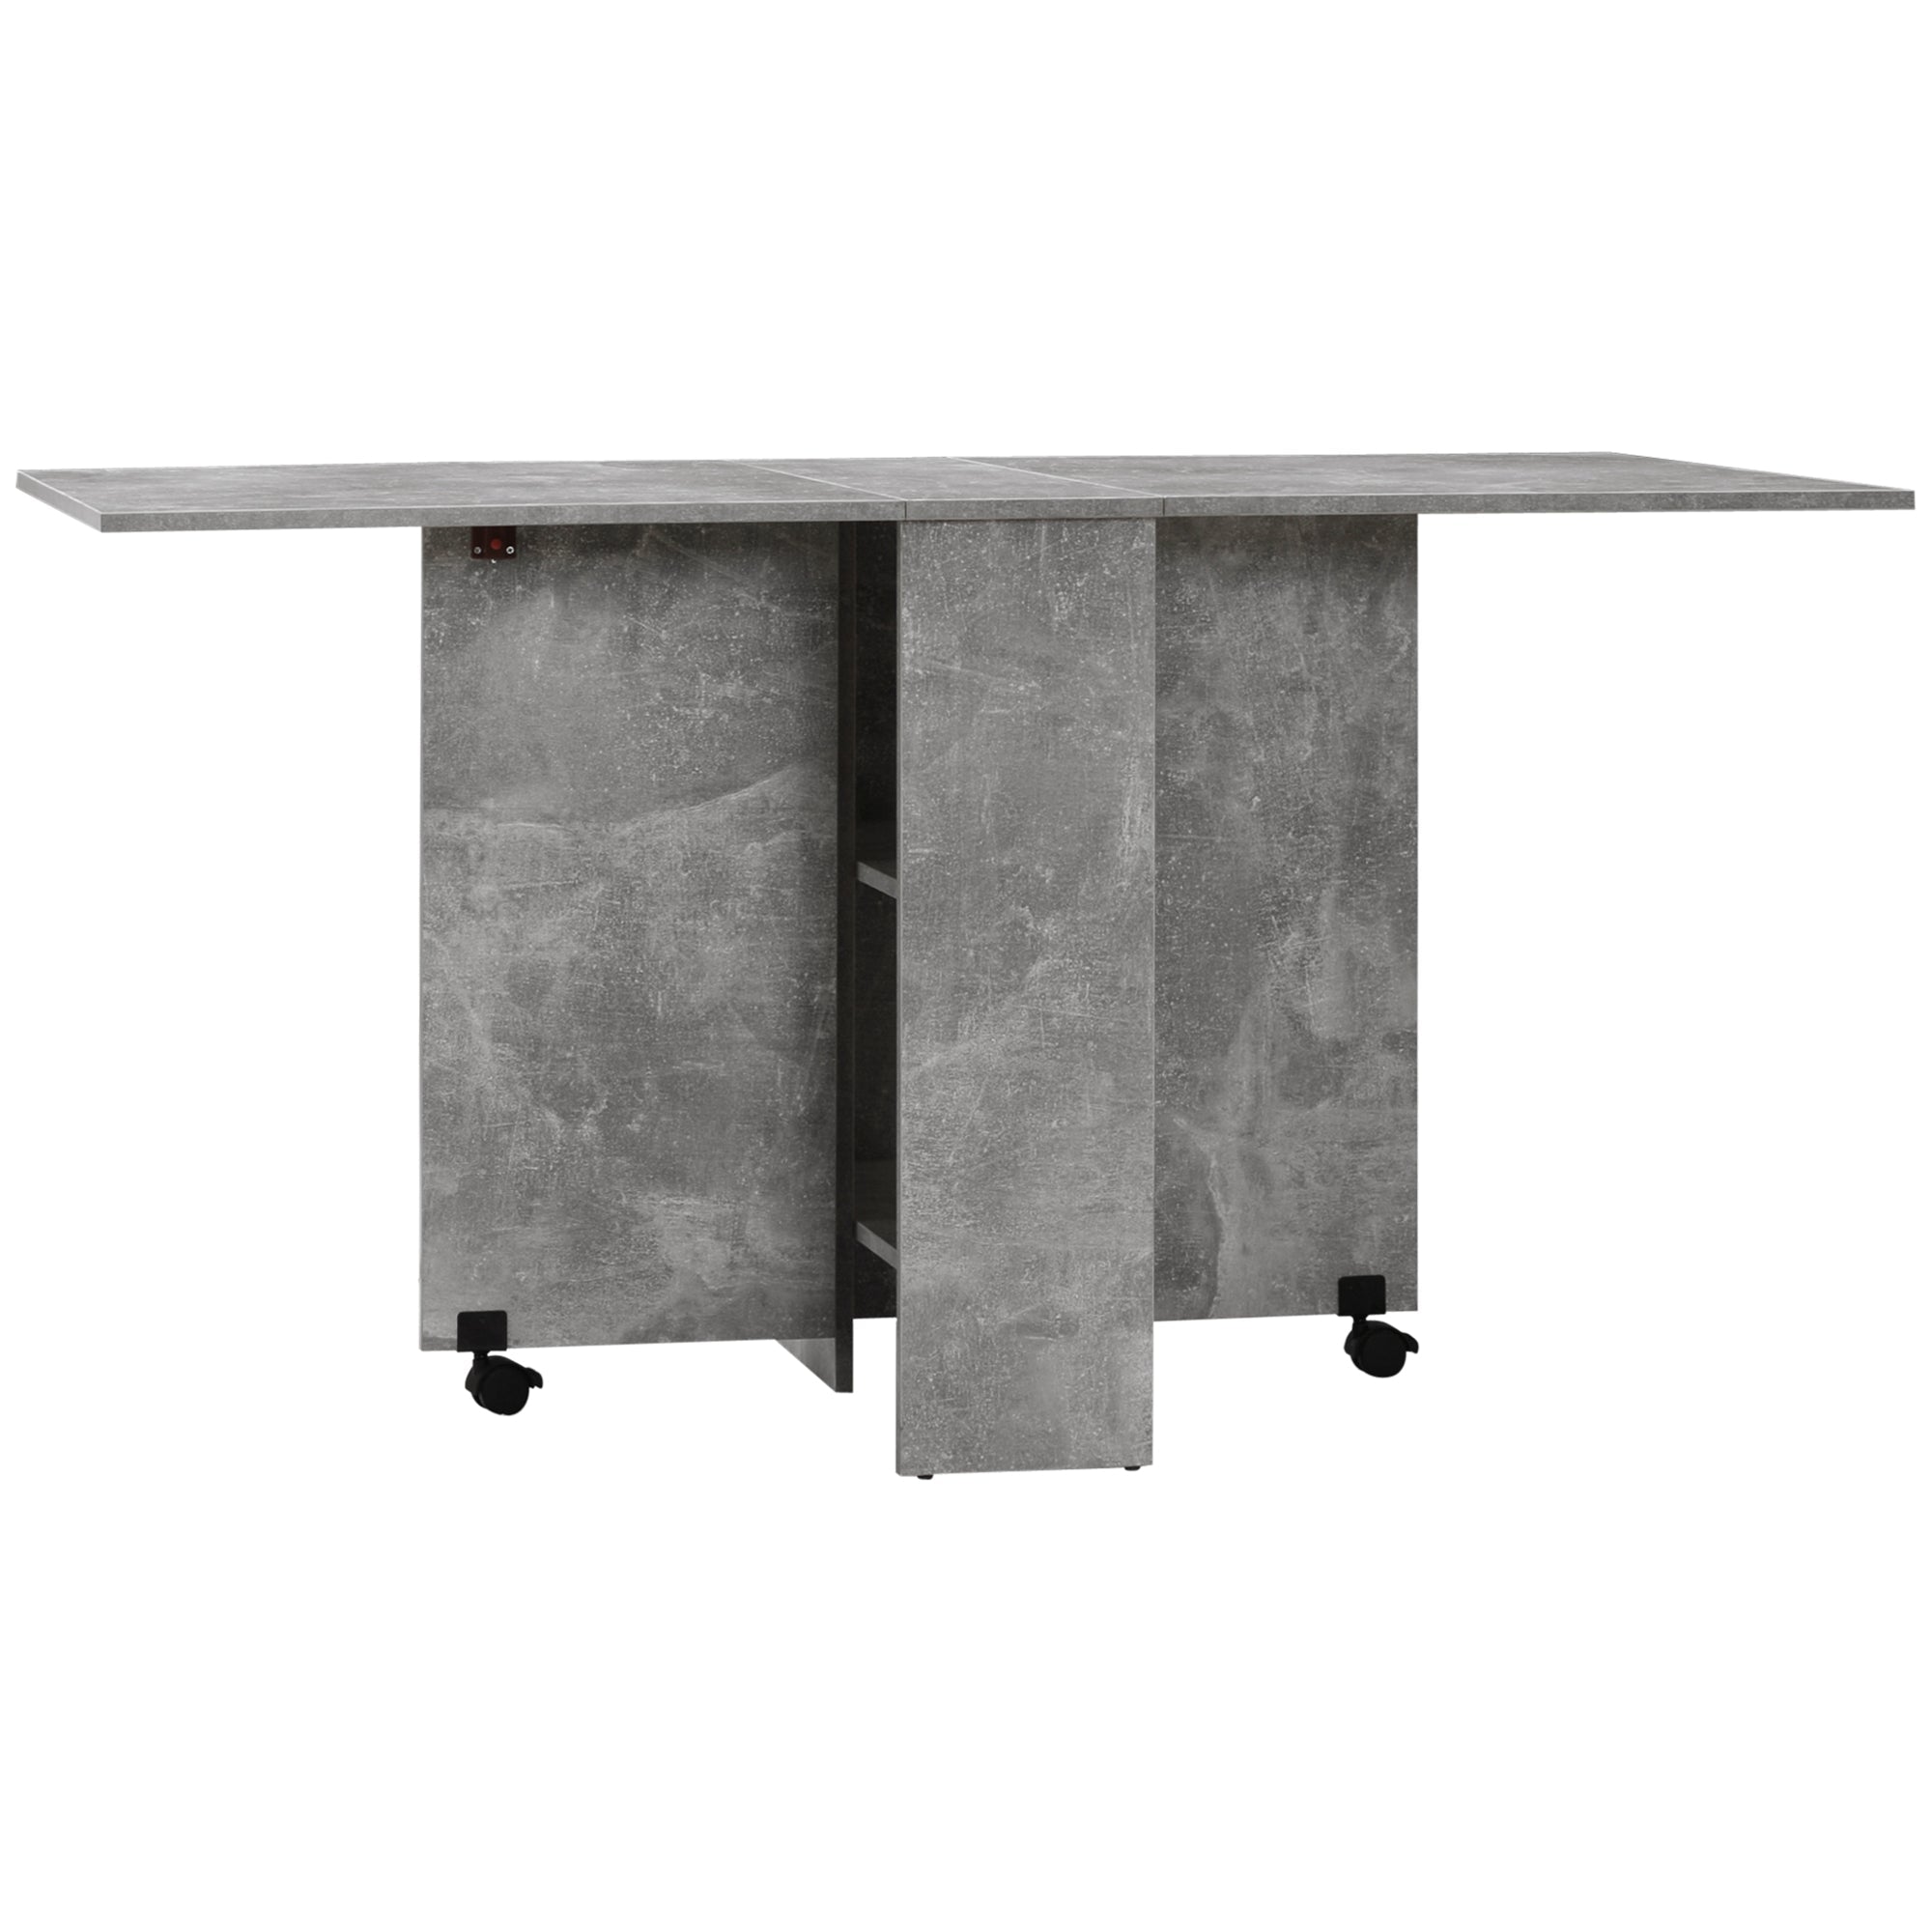 Folding Dining Table, Drop Leaf Table for Small Spaces with 2-tier Shelves, Small Kitchen Table with Rolling Casters, Cement Grey-0